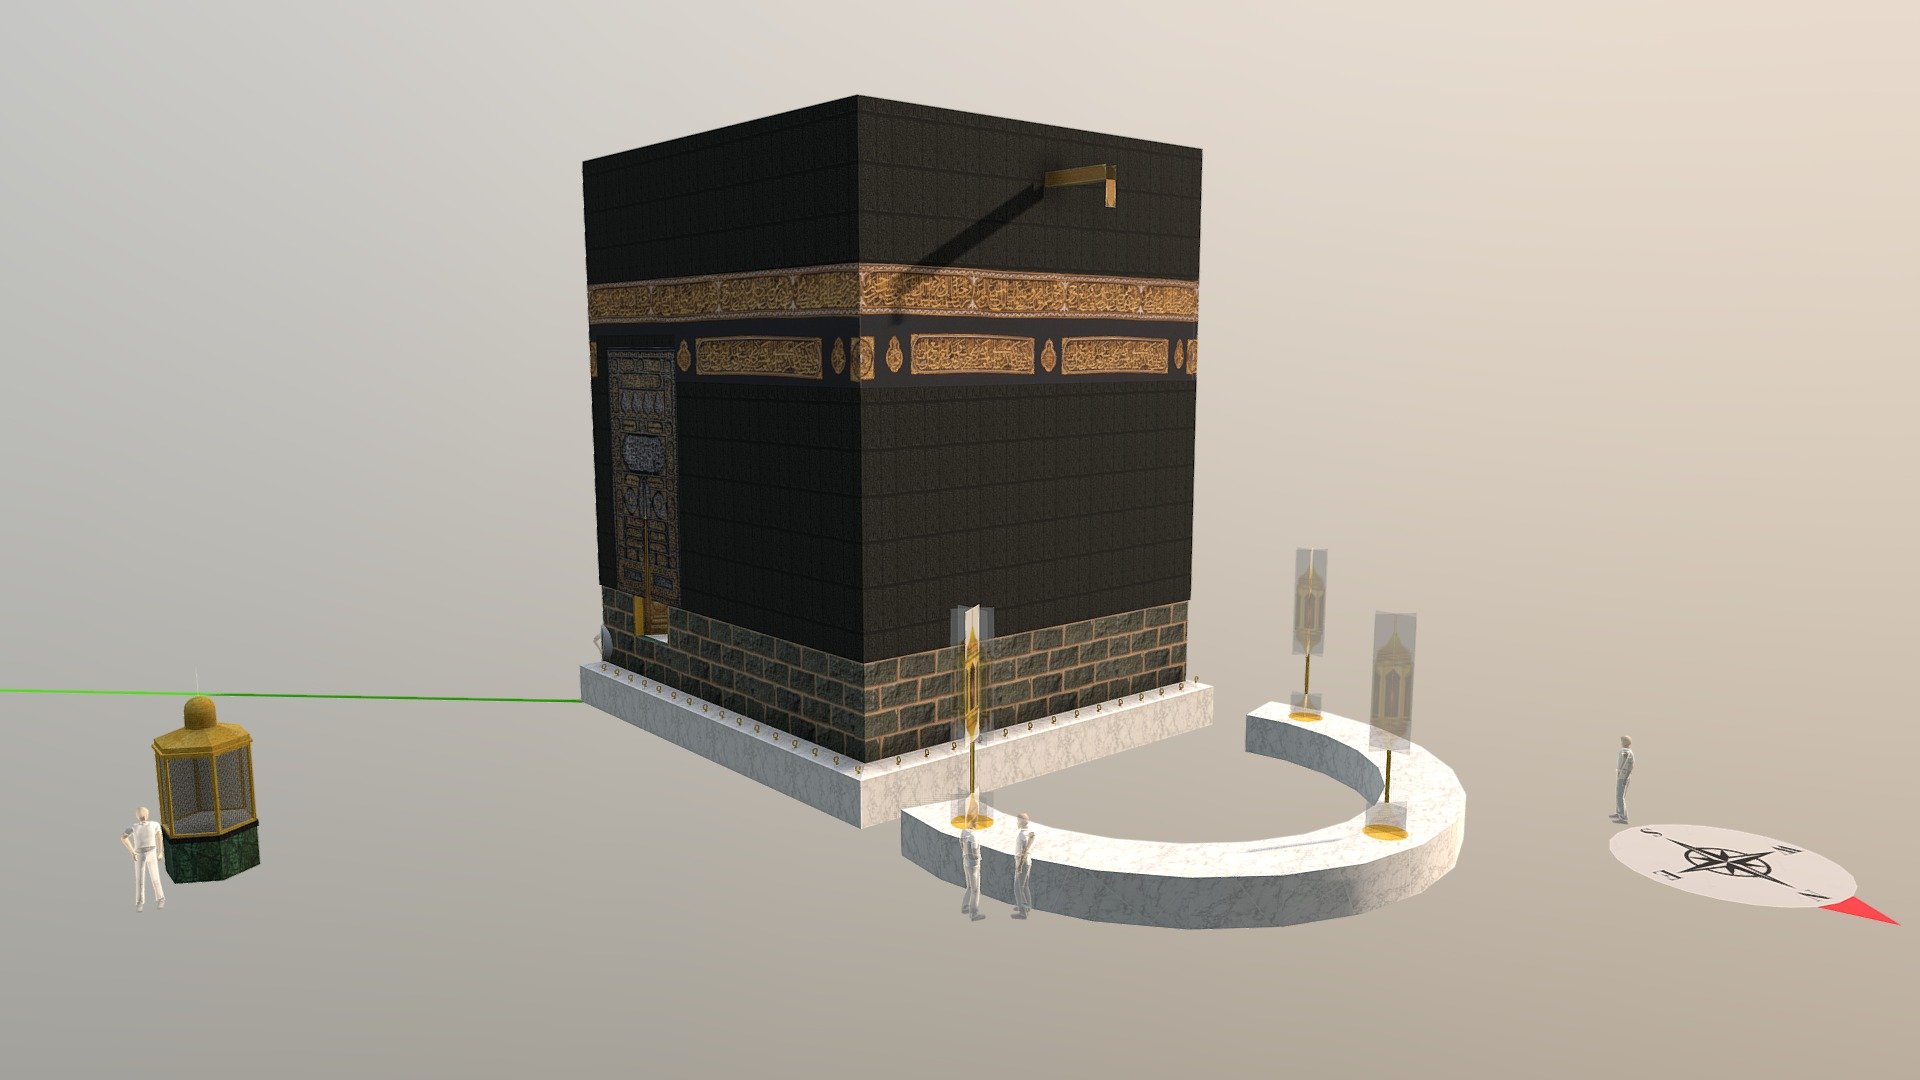 Download includes source files in OBJ, SKP, DAE, and KMZ formats, as well as photorealistic textures in an MTL file.

The Kabba (Arabic: ٱلْـكَـعْـبَـة The Cube) is a building at the center of Islam's most important mosque: the Al-Masjid Al-Ḥarām. This is the most sacred site in Islam. Muslims consider it the &ldquo;House of God,